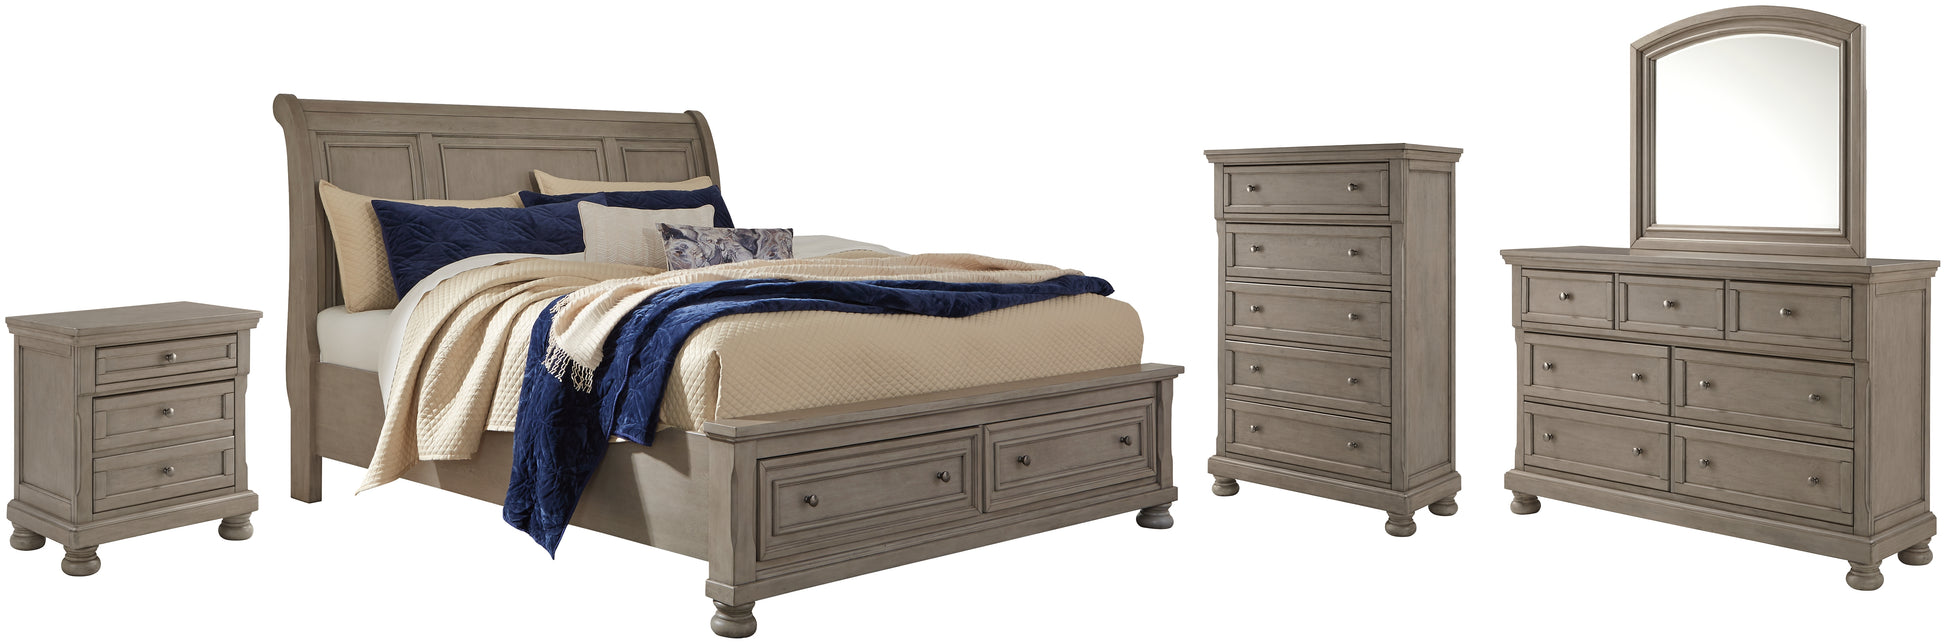 Lettner California King Sleigh Bed with Mirrored Dresser, Chest and Nightstand Wilson Furniture (OH)  in Bridgeport, Ohio. Serving Bridgeport, Yorkville, Bellaire, & Avondale